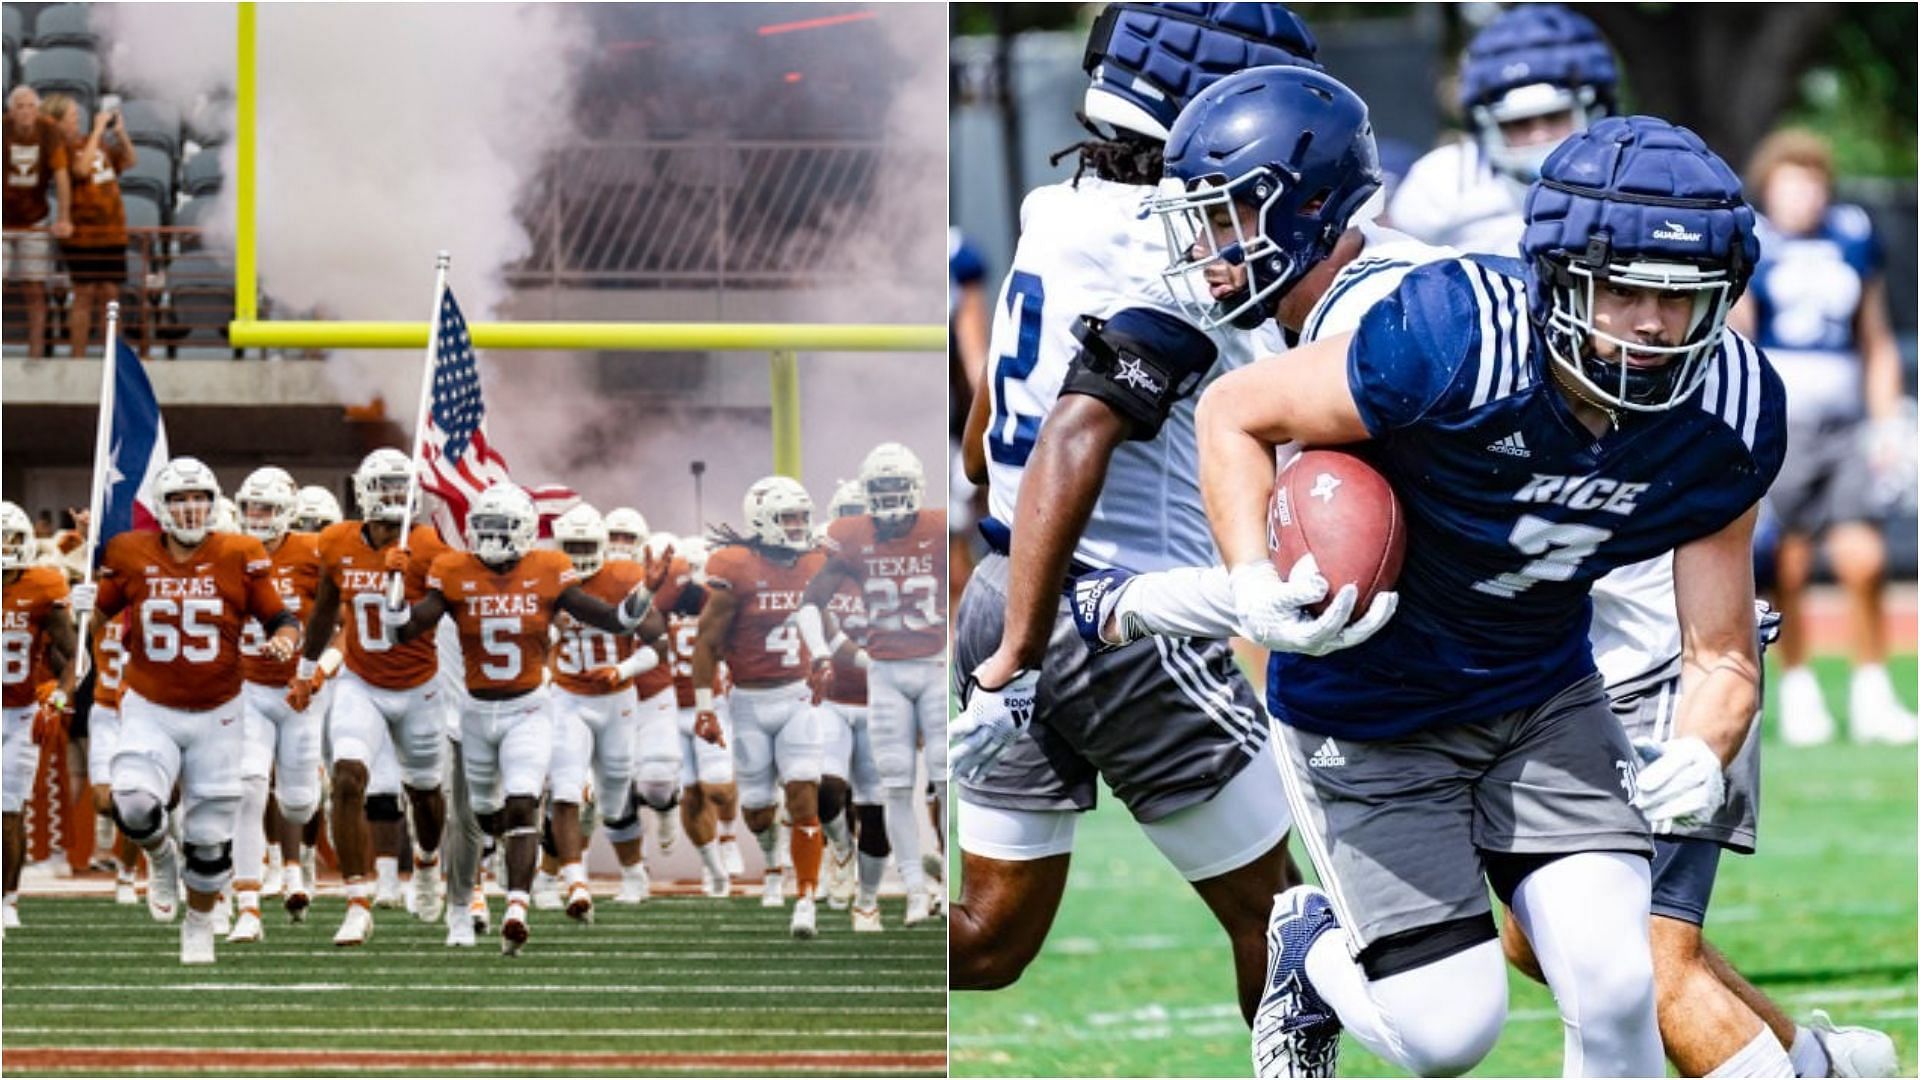 The Texas Longhorns are going against the Rice Owls in Week 1